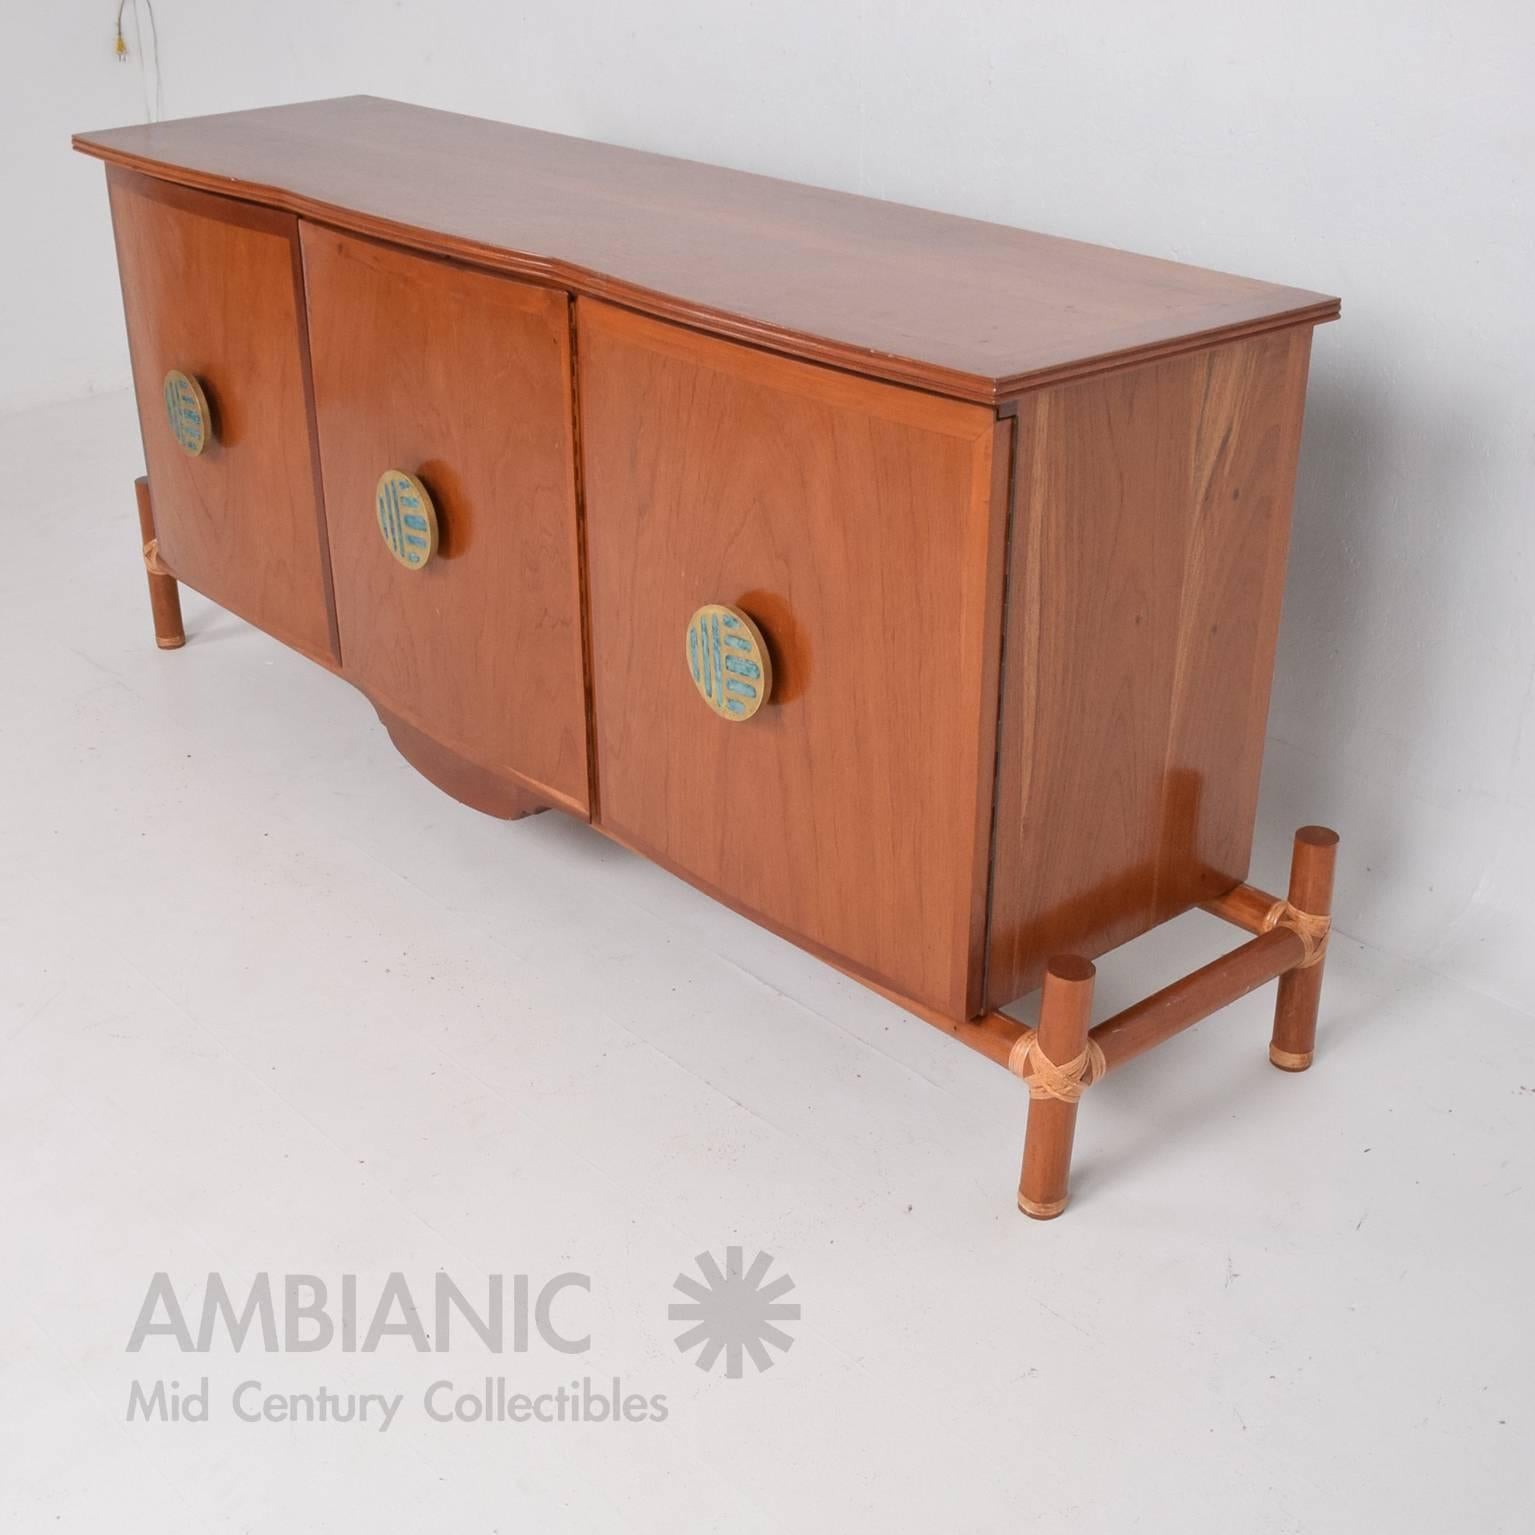 For your consideration a credenza or cabinet made in Mexico circa 1960s, 
Mahogany wood with beautiful bronze pull with malachite.

Cabinet is unsigned, no label present from the maker. Pulls are stamped with Mendoza logo. 

Measures: 35"